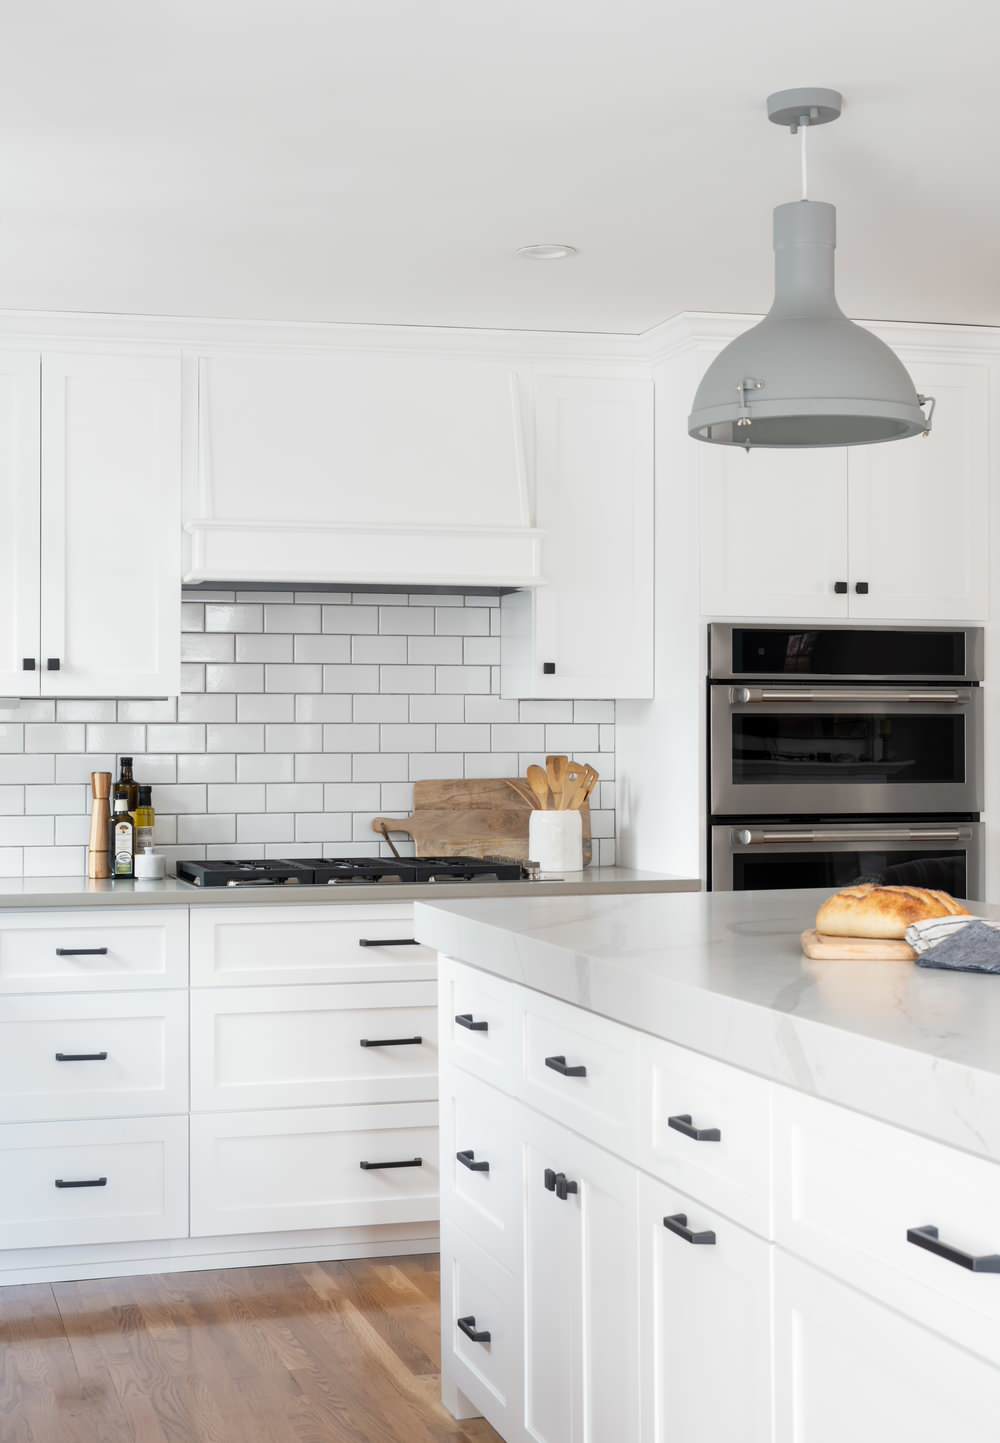 Medfield Kitchen and Dining Renovation